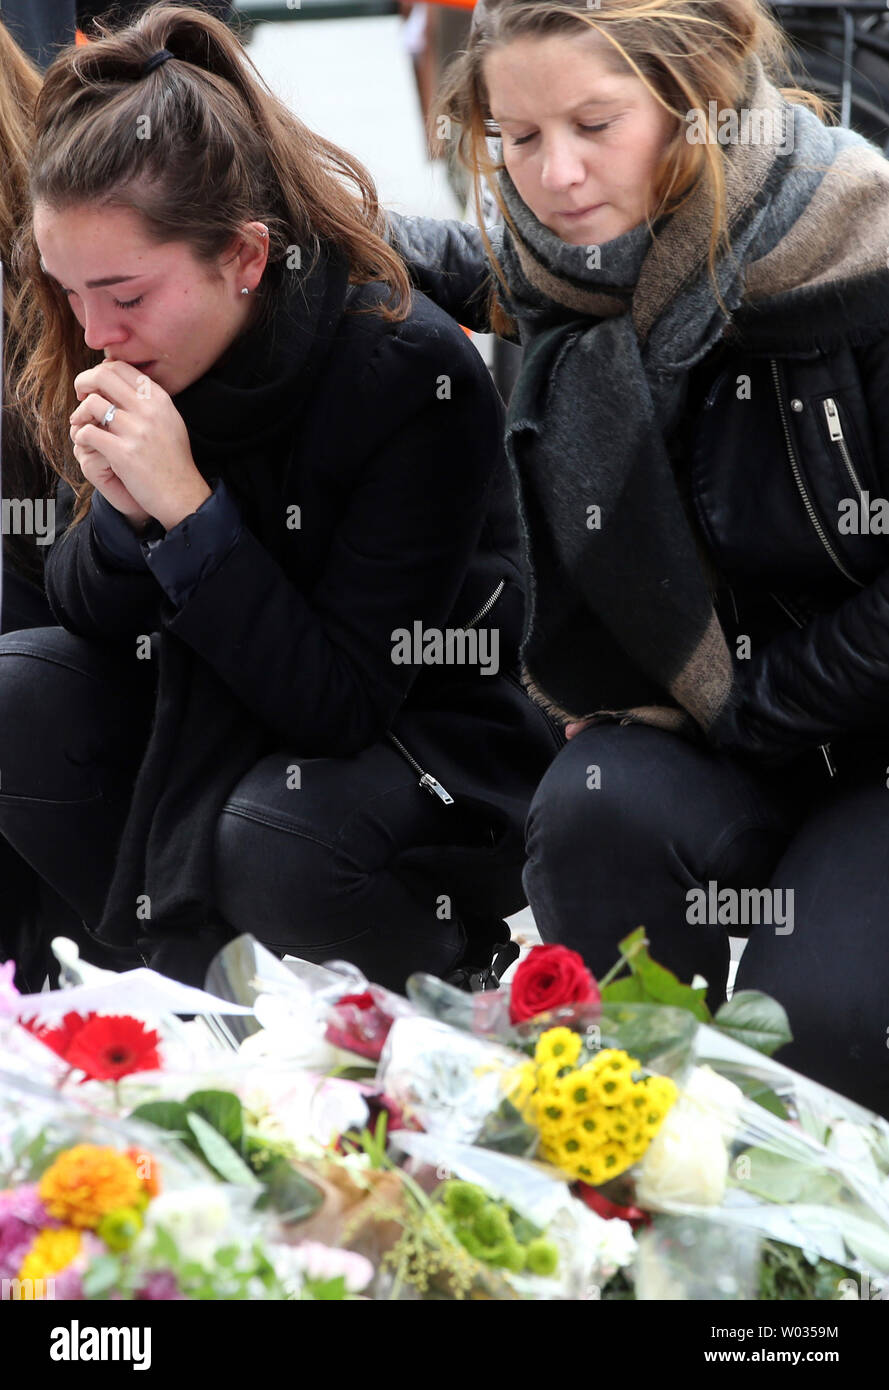 People mourn in front of Le Carillon bistro and Le Petit Cambodge restaurant on November 16, 2015. More than one hundred people were killed and many more wounded when gunmen opened fire at multiple locations across the French capital during a series of deadly attacks on November 13. Photo by Maya Vidon-White/UPI Stock Photo